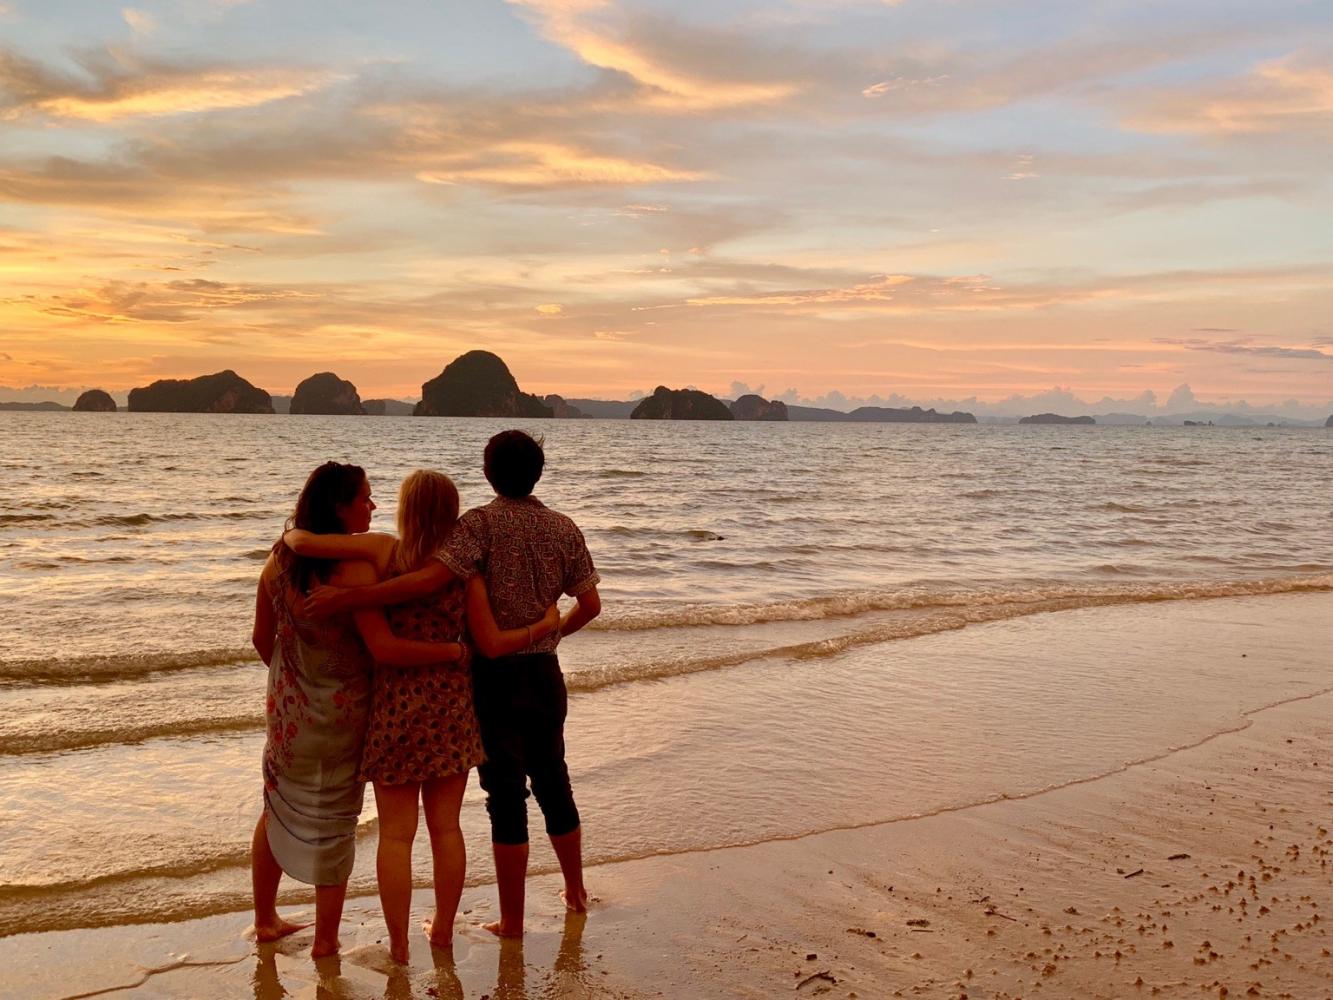 Three people on a beach enjoy the sunset with their arms around one another